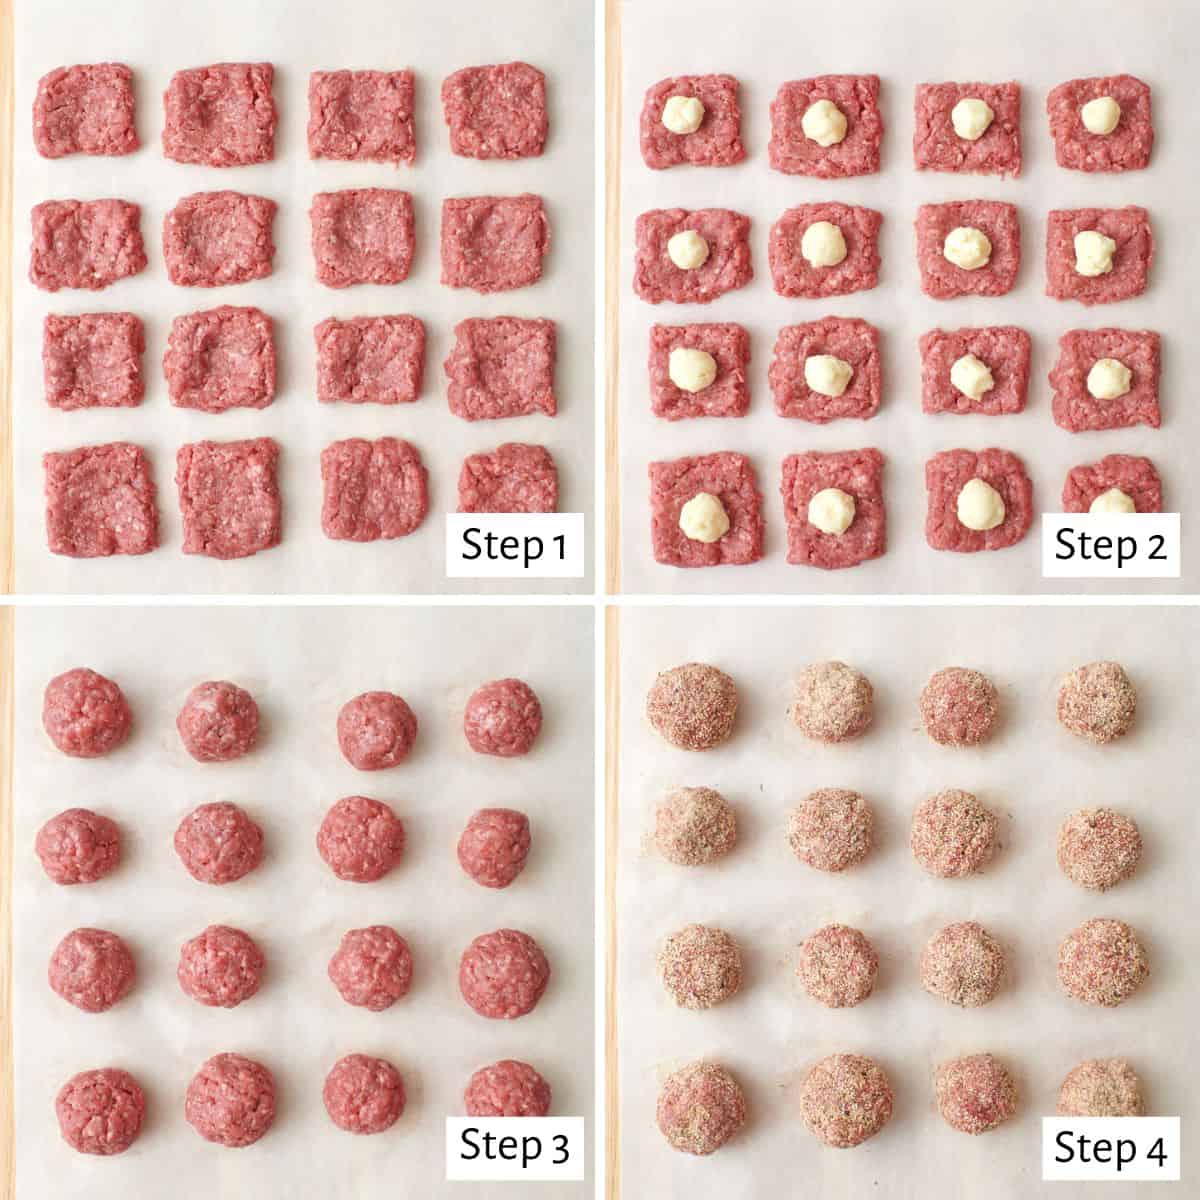 4 image collage making recipe: 1- ground beef flattened and divided into 16 small squares, 2- a small ball of brie cheese added to the center of each one, 3- after rolling the beef around the cheese into a small meatball, 4- after coating the meatballs in breadcrumbs.